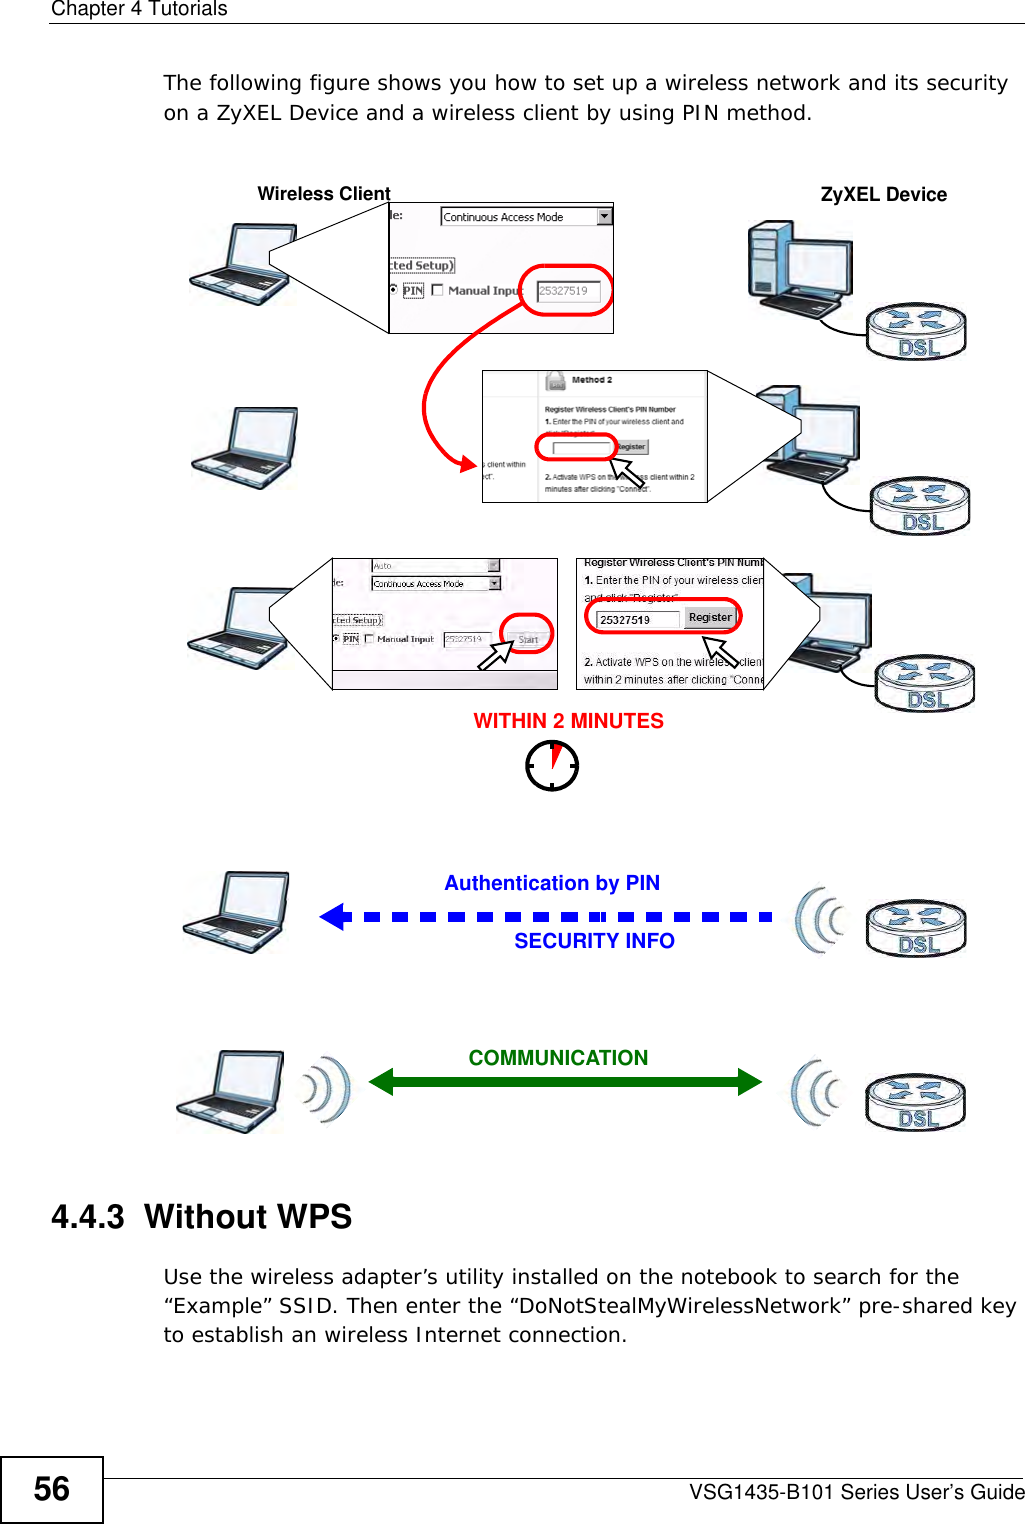 Chapter 4 TutorialsVSG1435-B101 Series User’s Guide56The following figure shows you how to set up a wireless network and its security on a ZyXEL Device and a wireless client by using PIN method. Example WPS Process: PIN Method4.4.3  Without WPSUse the wireless adapter’s utility installed on the notebook to search for the “Example” SSID. Then enter the “DoNotStealMyWirelessNetwork” pre-shared key to establish an wireless Internet connection.Authentication by PINSECURITY INFOWITHIN 2 MINUTESWireless ClientZyXEL DeviceCOMMUNICATION